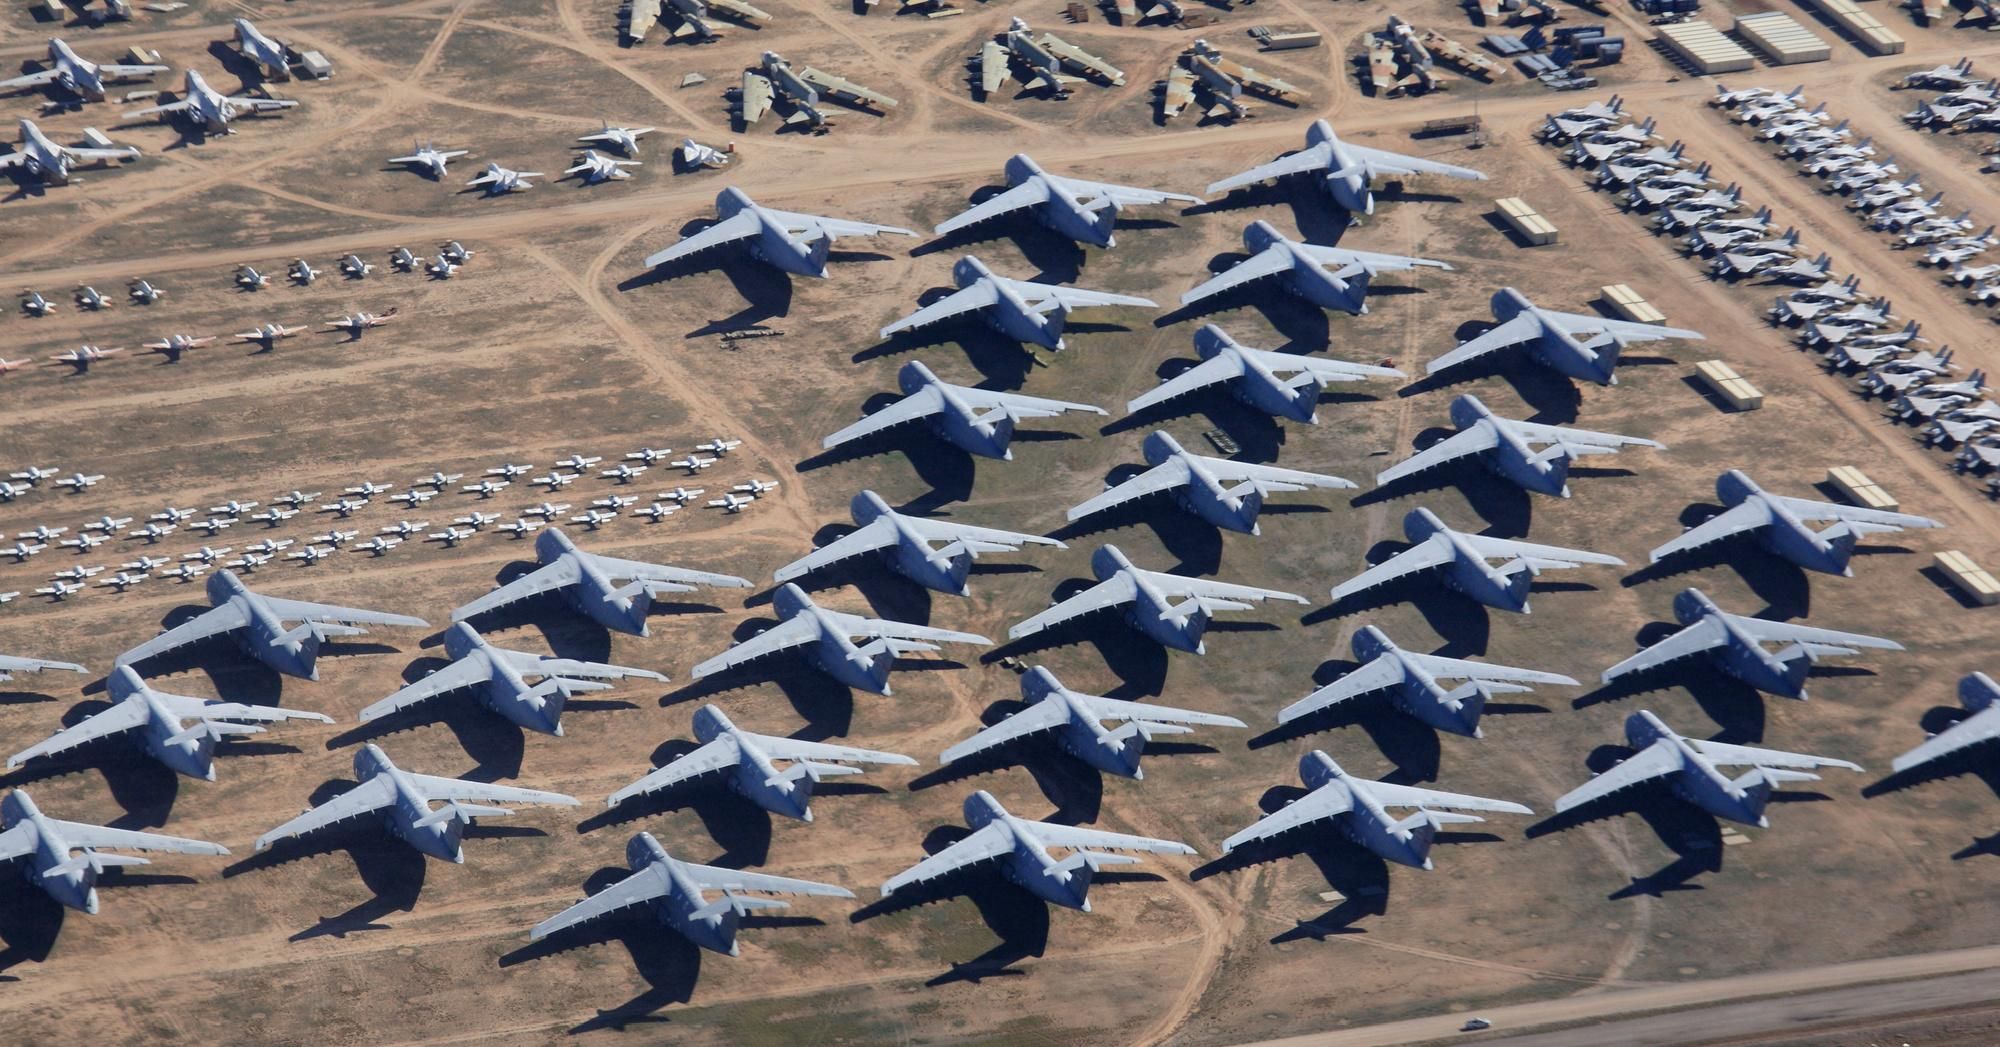 Surplus U.S. military planes are stored in the largest airplane boneyard in the world, operated by the 309th Aerospace Maintenance and Regeneration Group AMARG at Davis-Monthan Air Force Base in Tucson, Arizona. (Photo: Getty/Stock Photo)